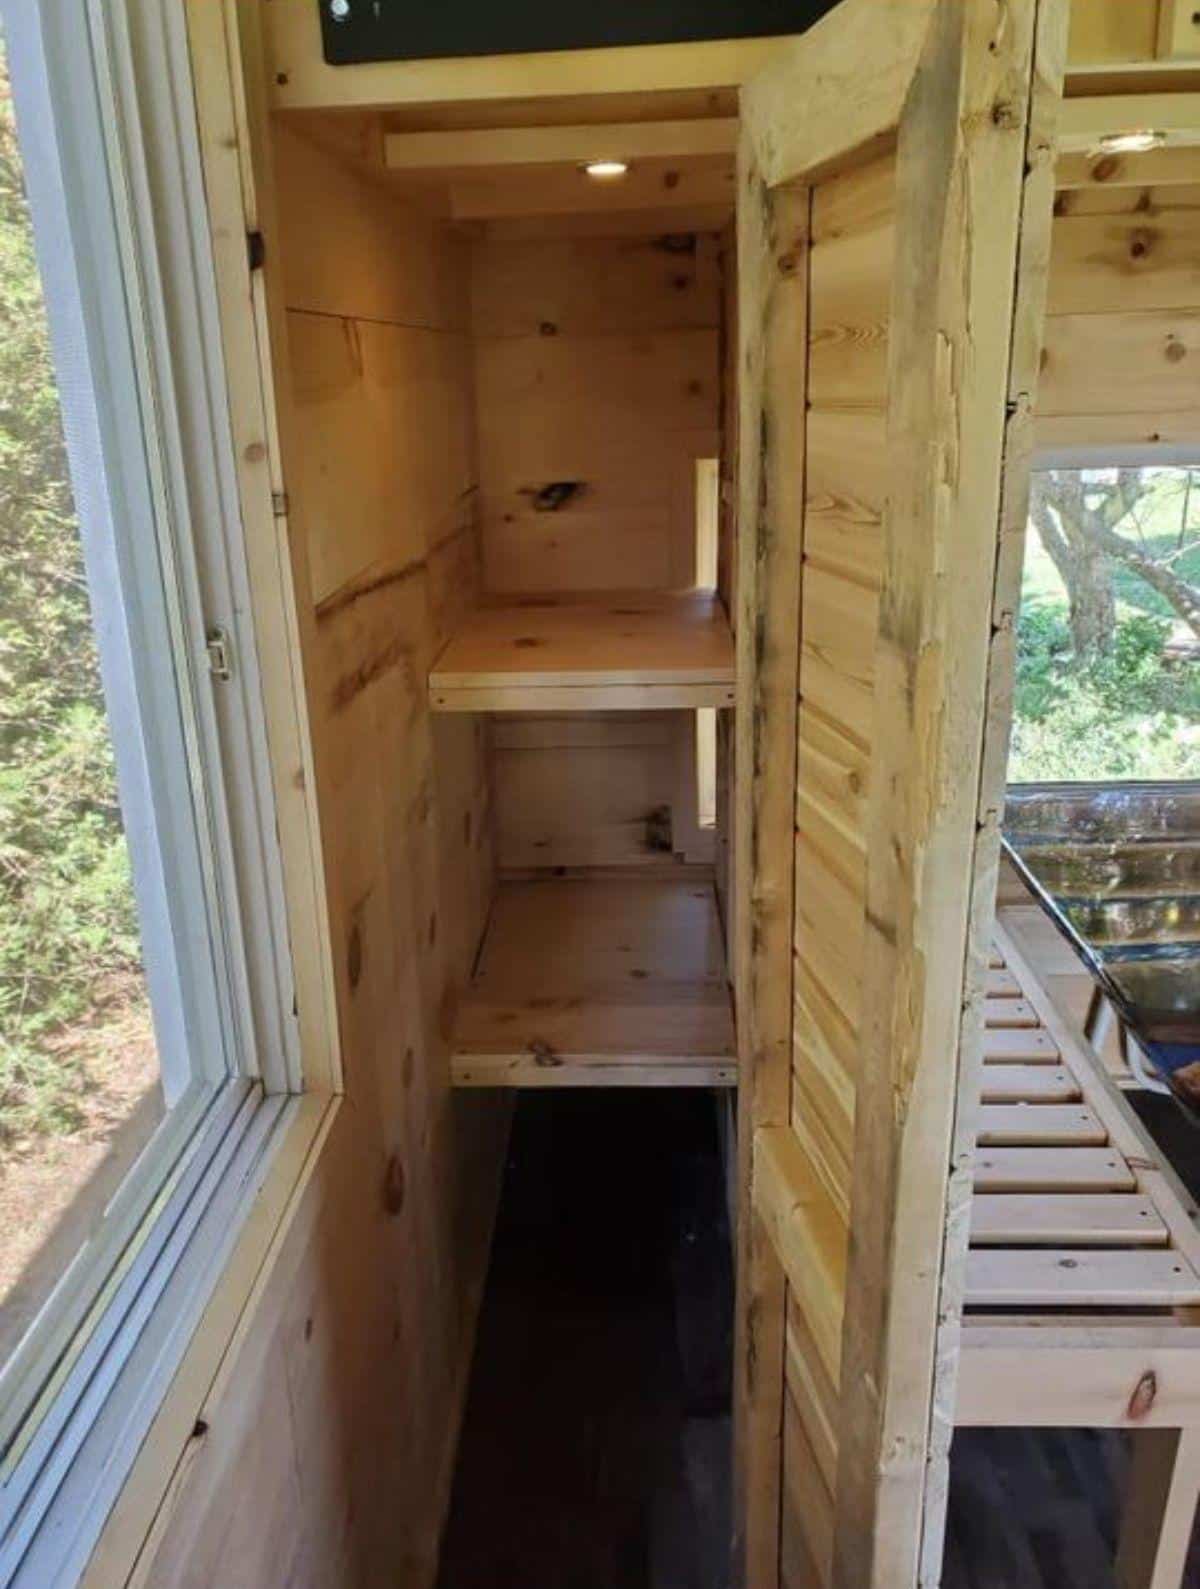 storage cabinets under the ,main loft of tiny cabin house